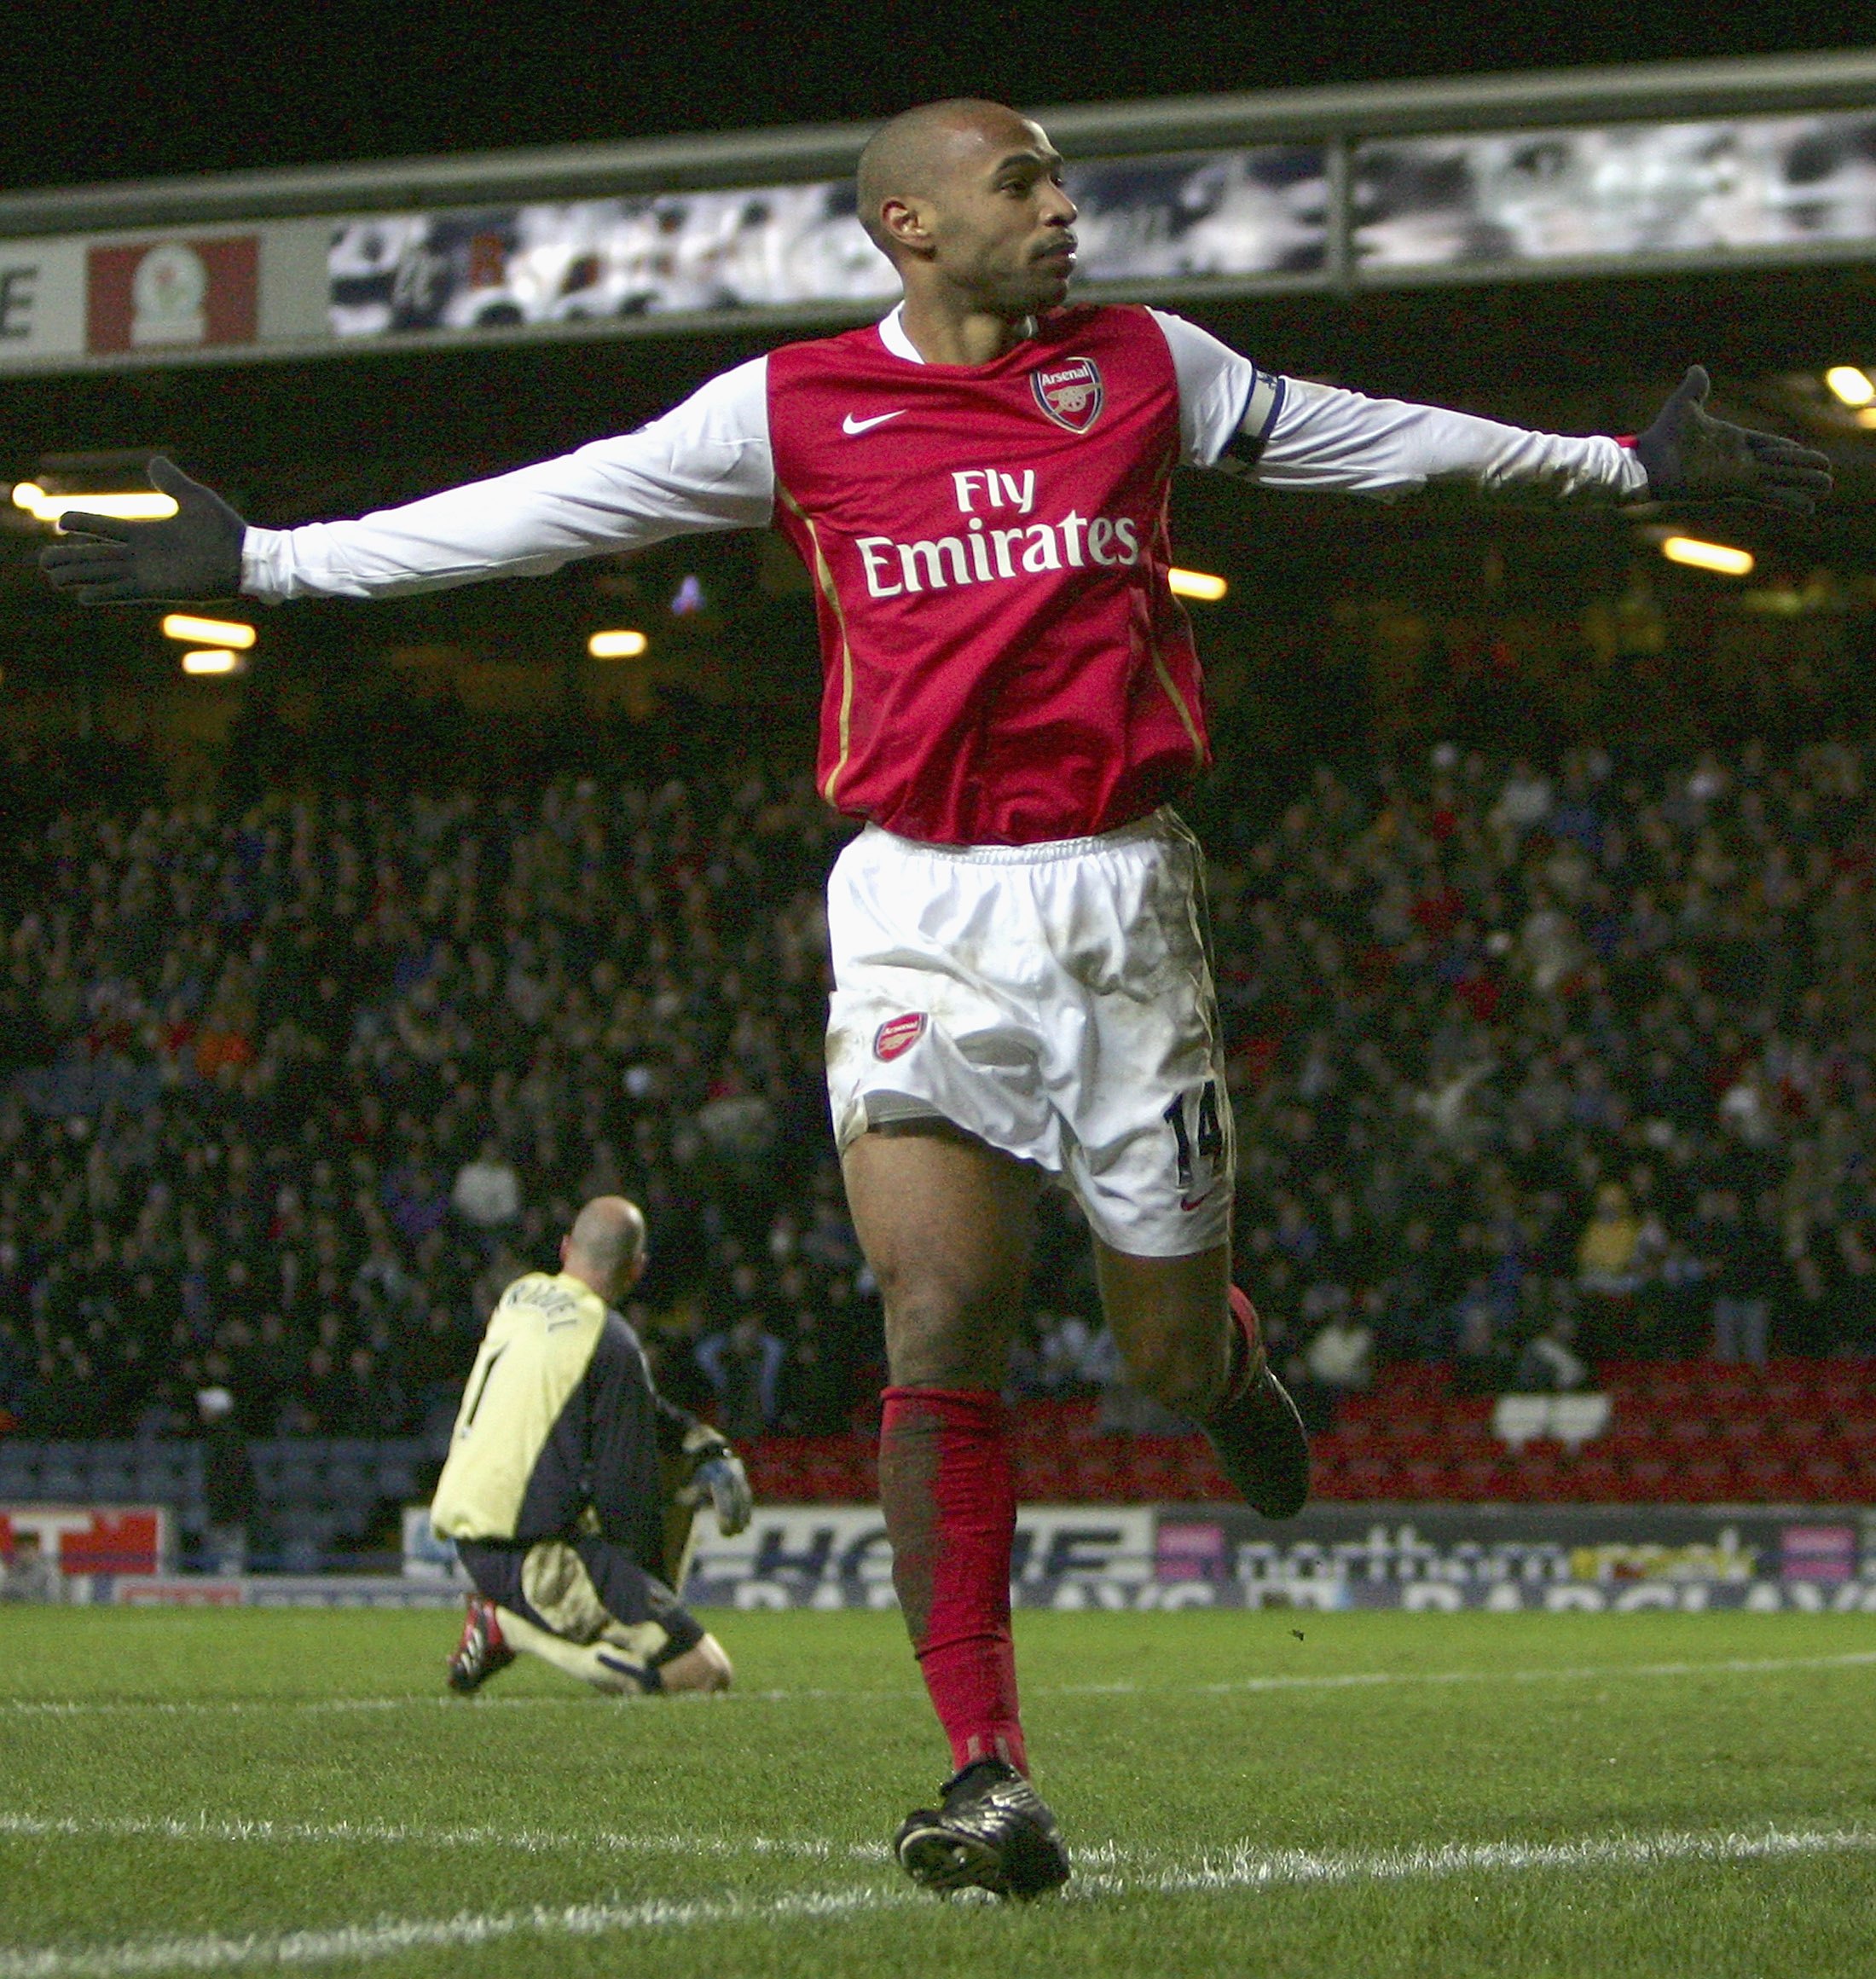 BLACKBURN, UNITED KINGDOM - JANUARY 13: Thierry Henry of Arsenal celebrates scoring his team's second goal during the Barclays Premiership match between Blackburn Rovers and Arsenal at Ewood Park on January 13, 2007 in Blackburn, England. (Photo by Lauren